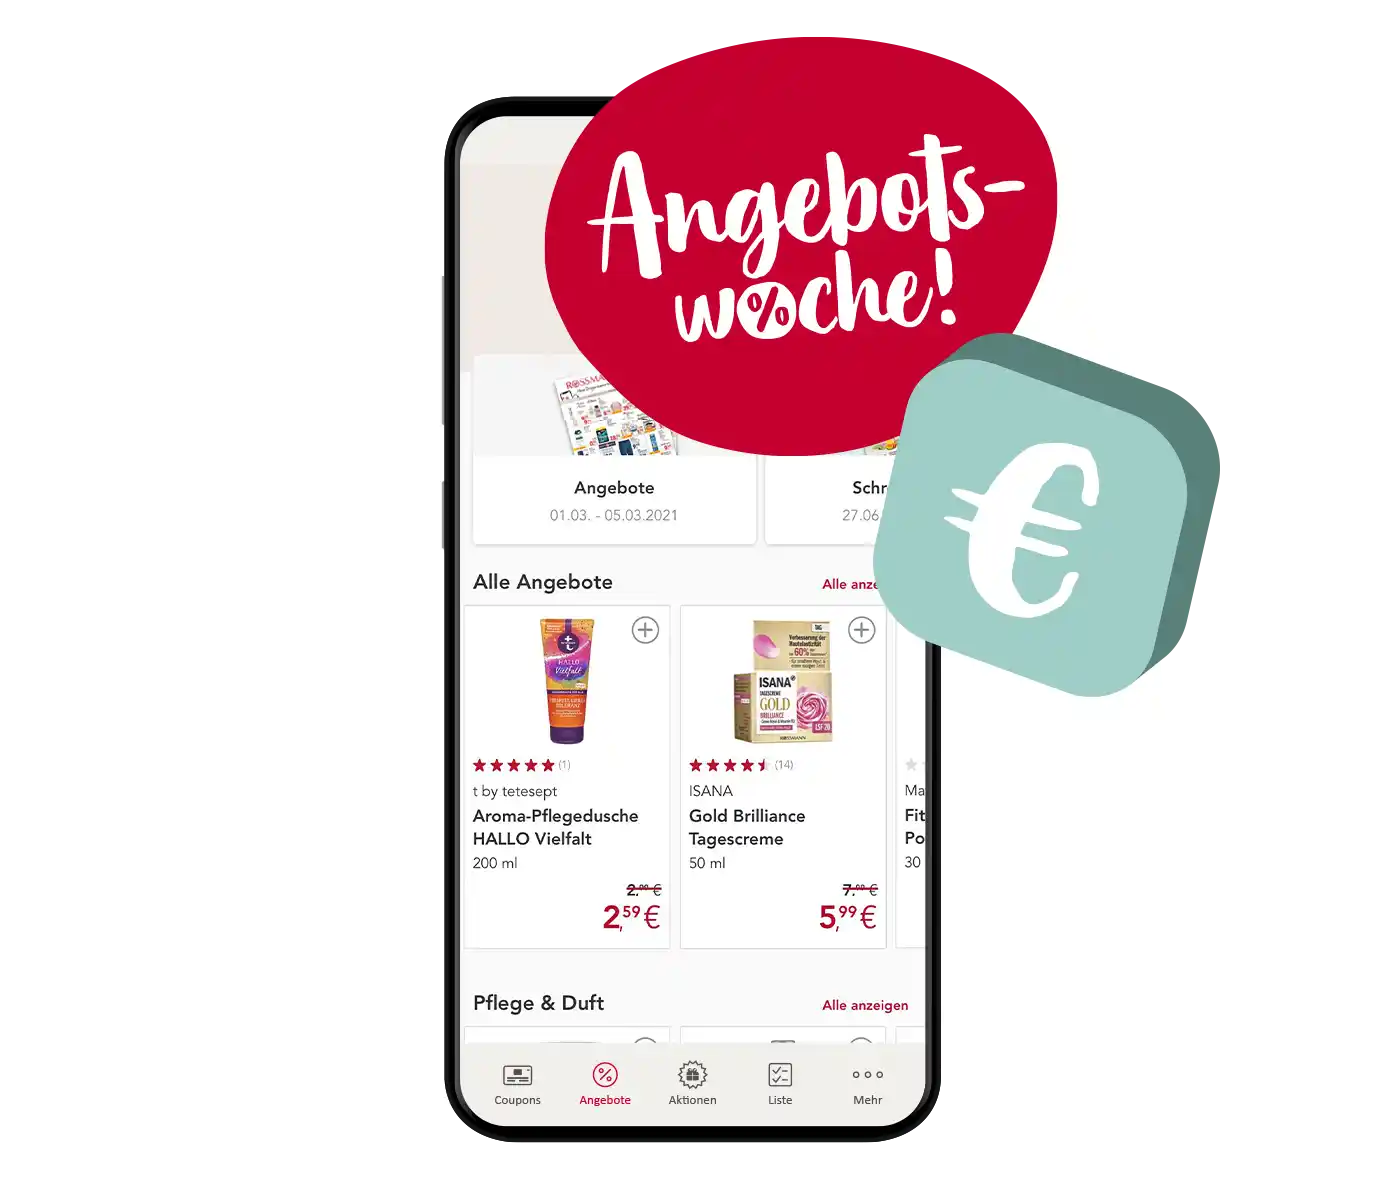 Rossmann - Coupons & Angebote - Apps on Google Play